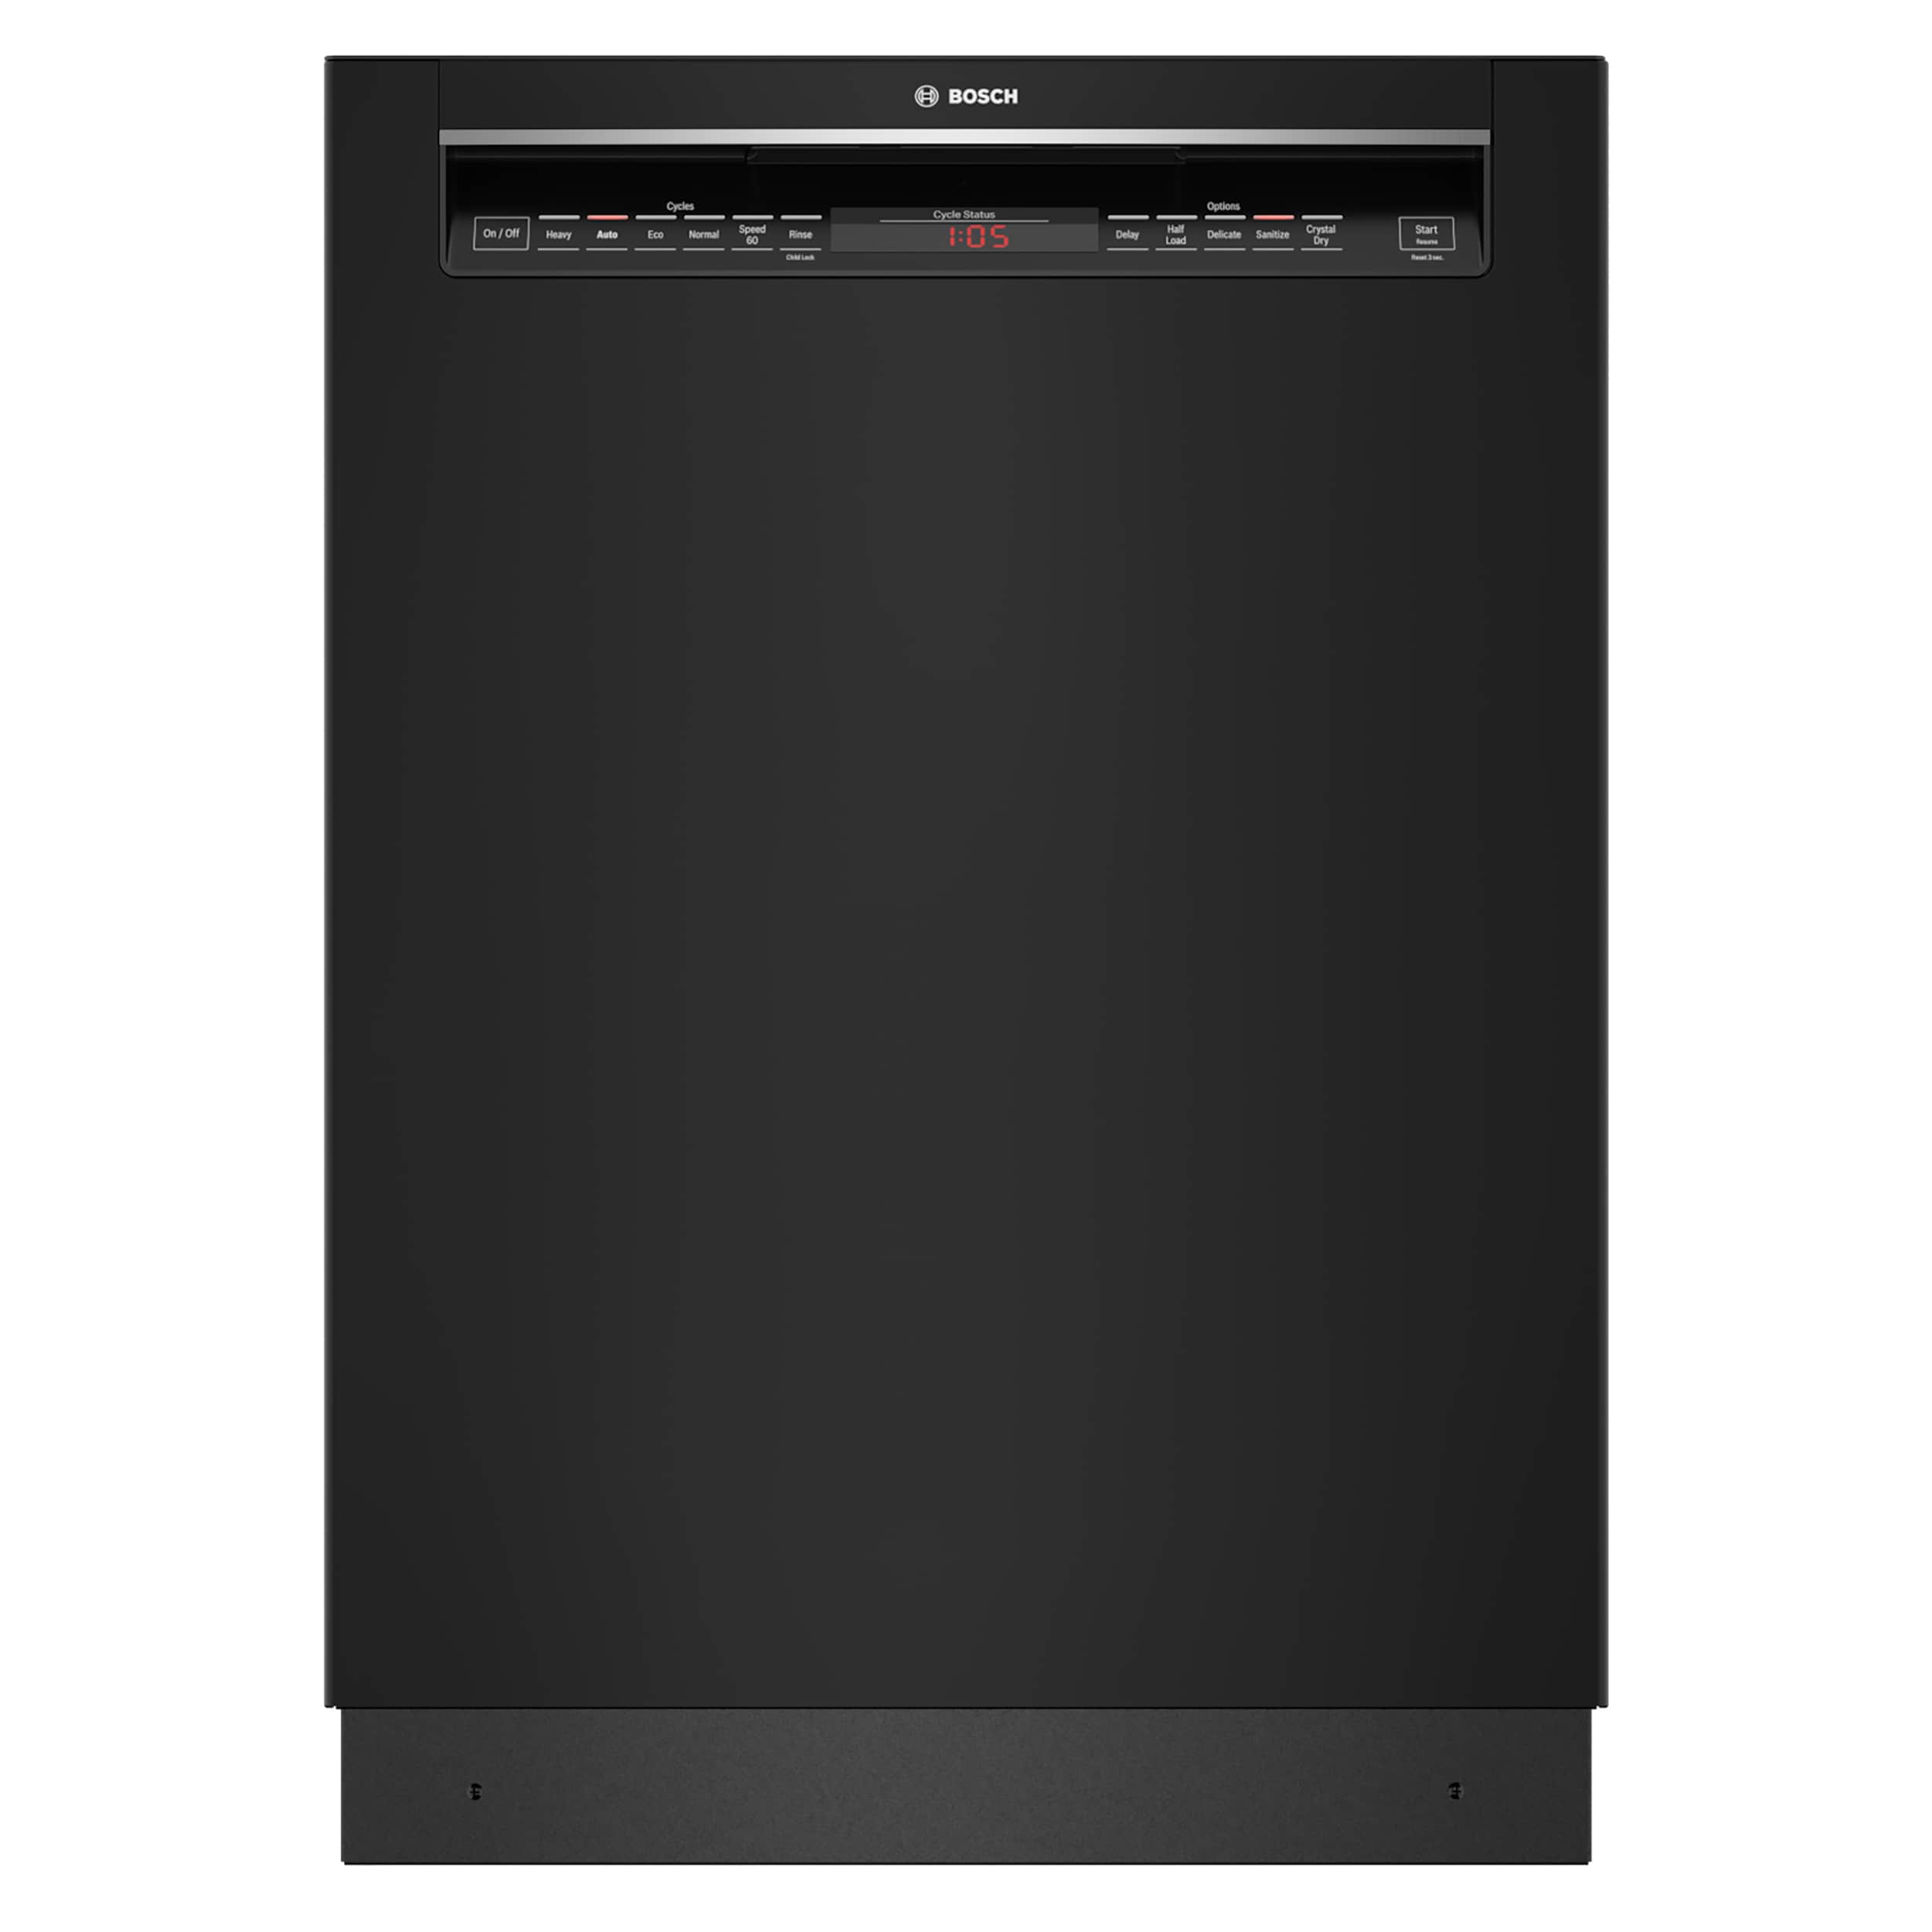 bosch-ascenta-front-control-24-in-built-in-dishwasher-black-energy-star-50-dba-in-the-built